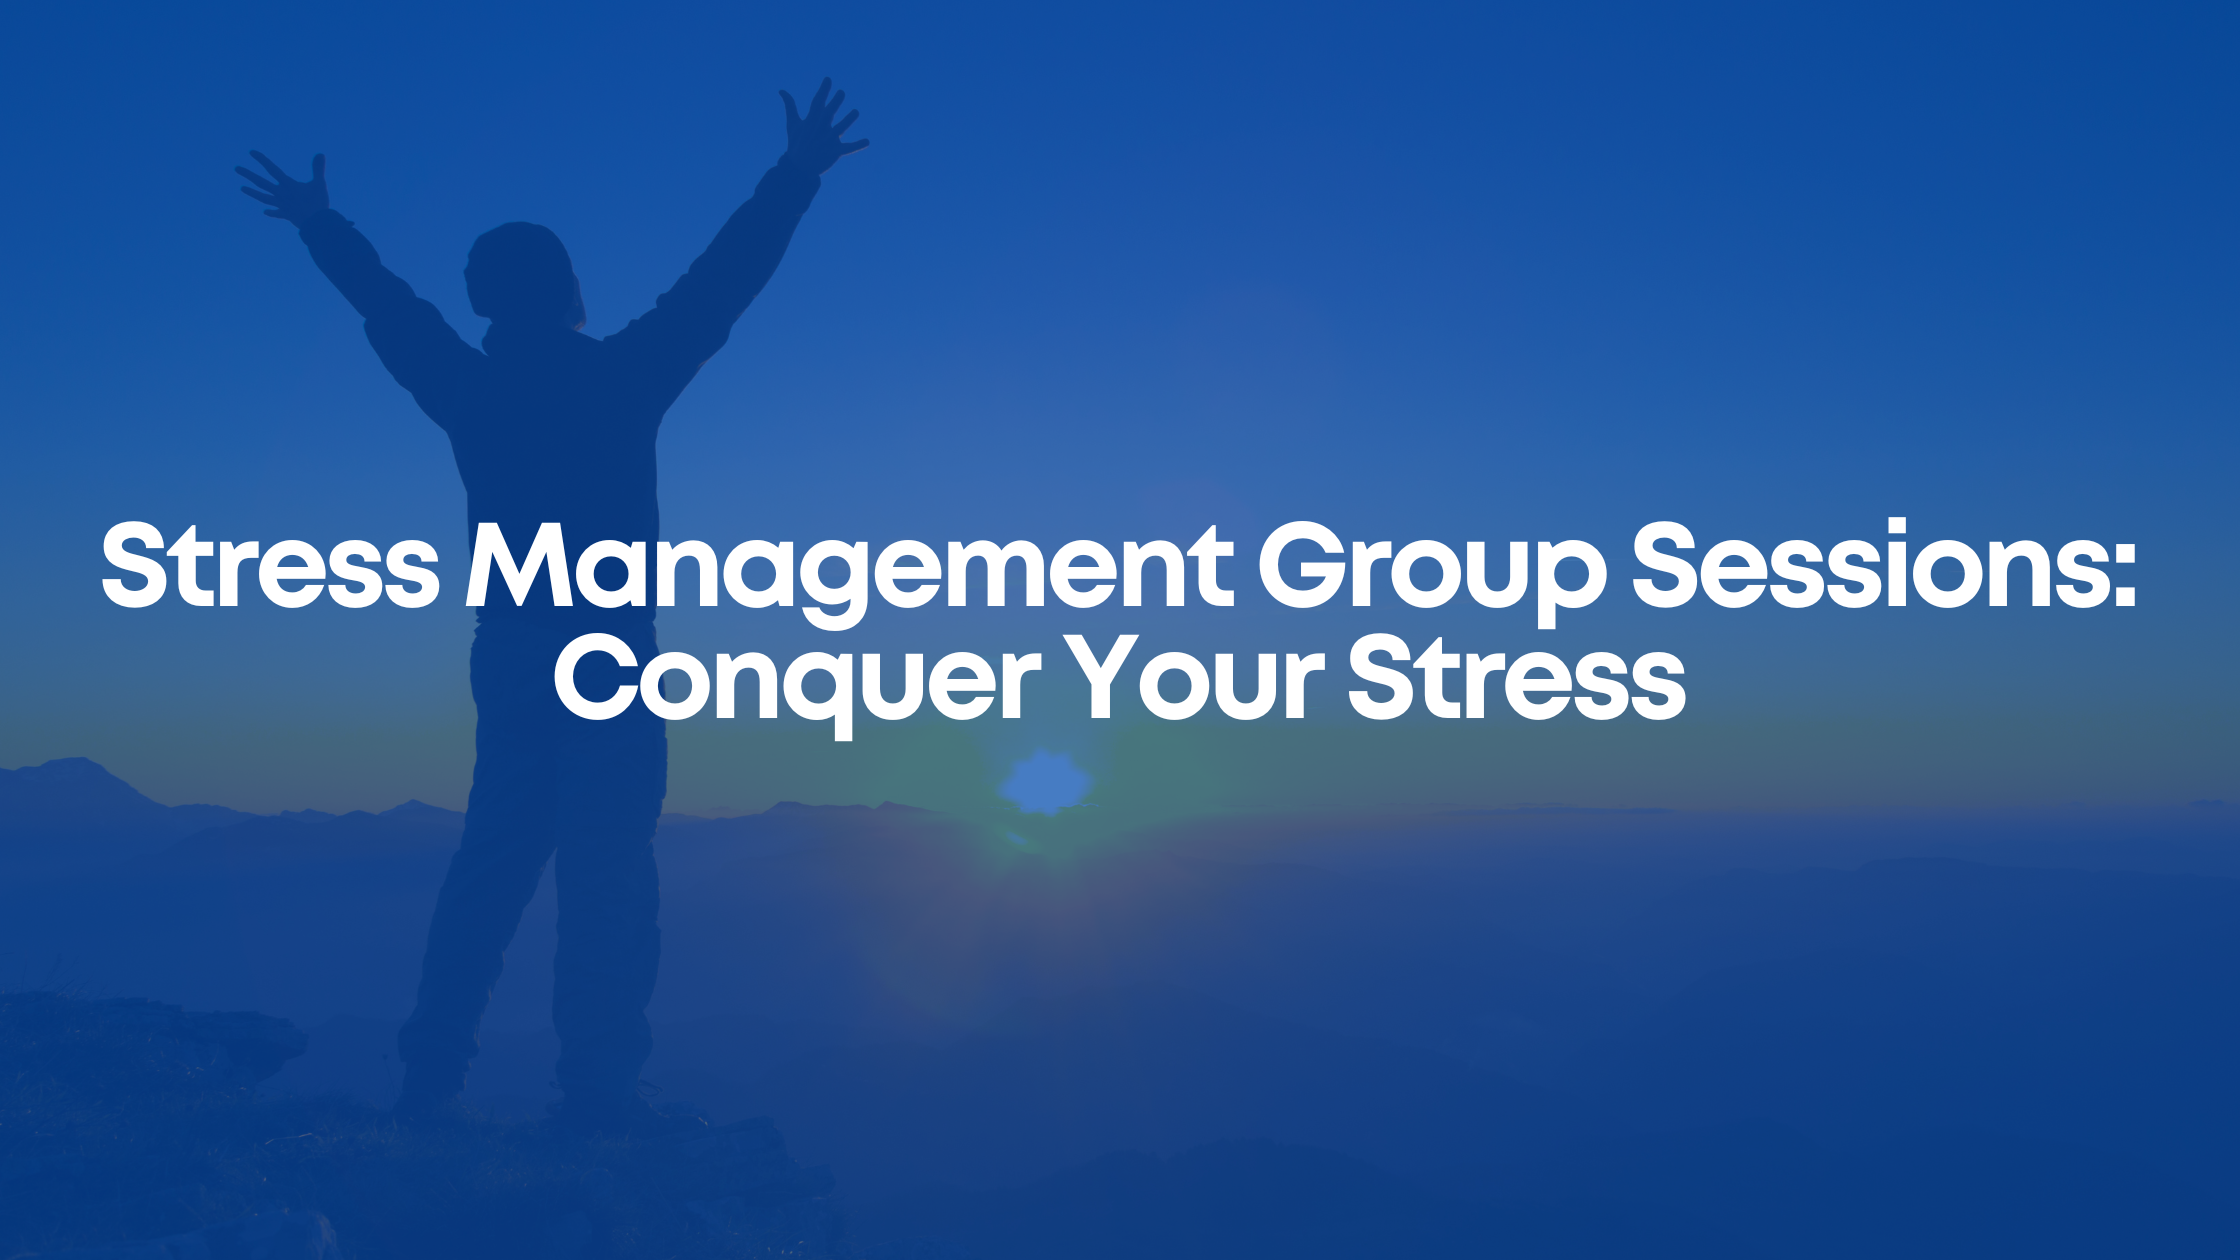 You are currently viewing Stress Management Group Sessions: Conquer Your Stress